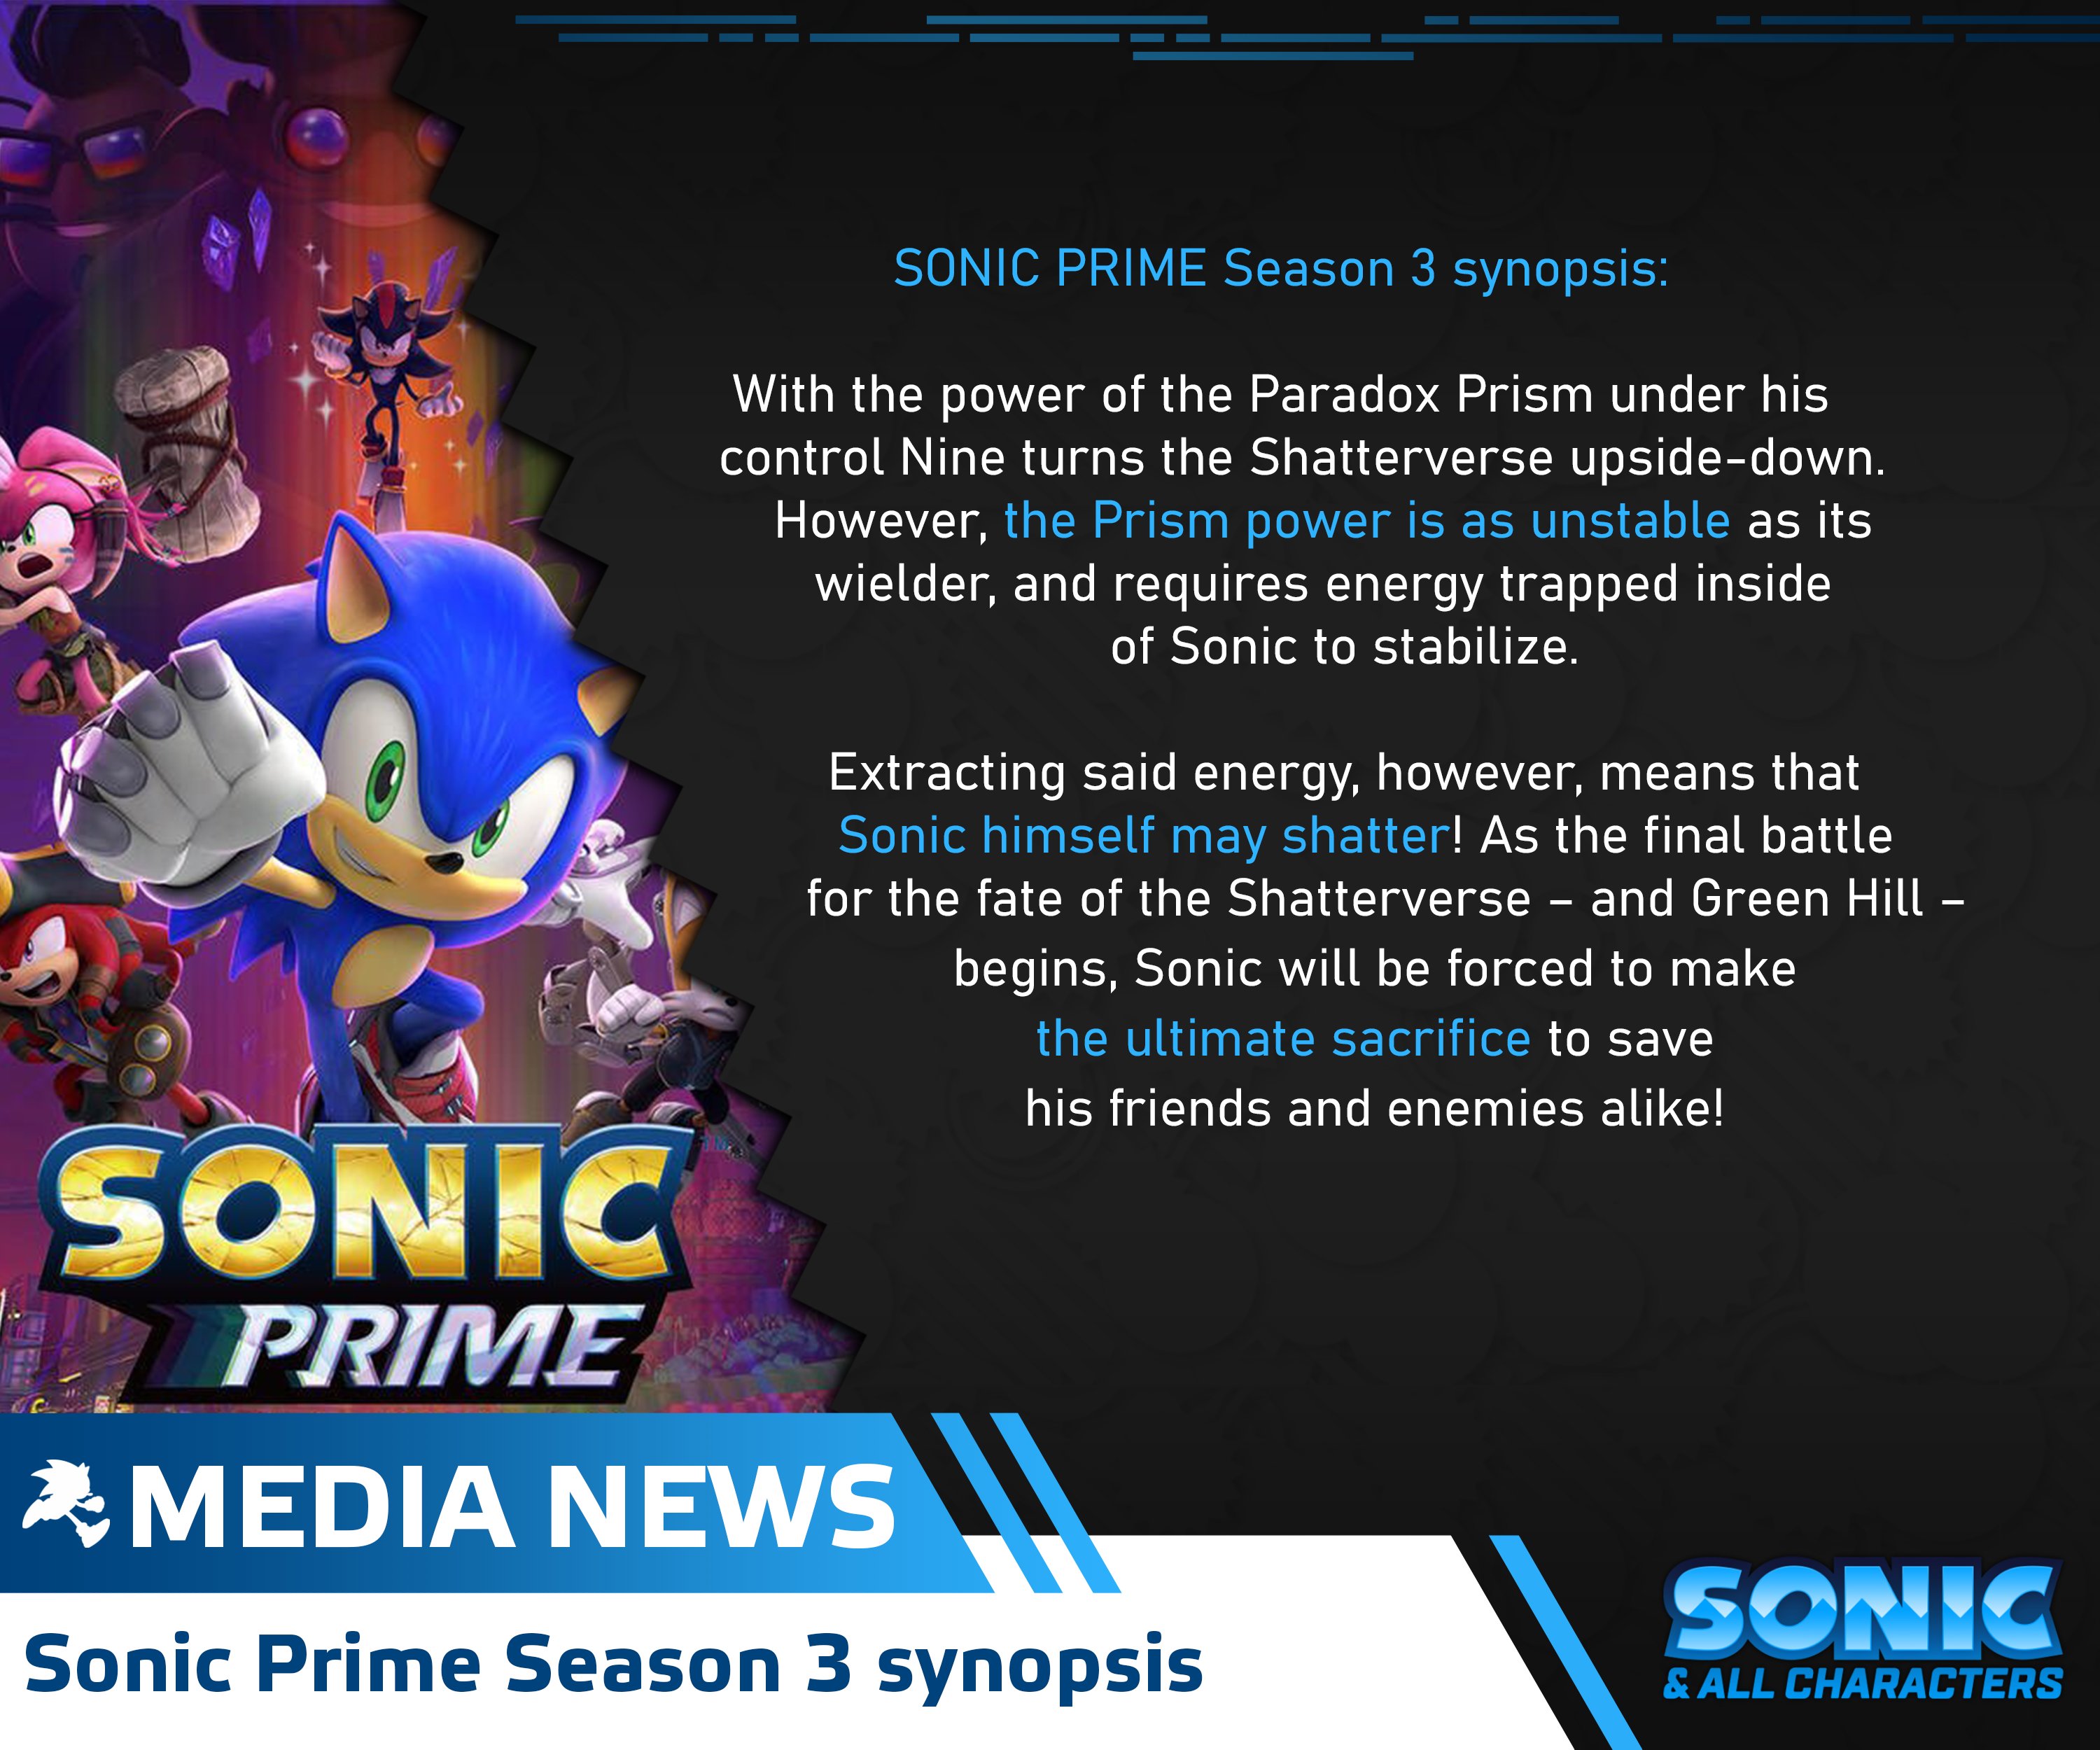 Sonic and all Characters on X: The official synopsis of Sonic